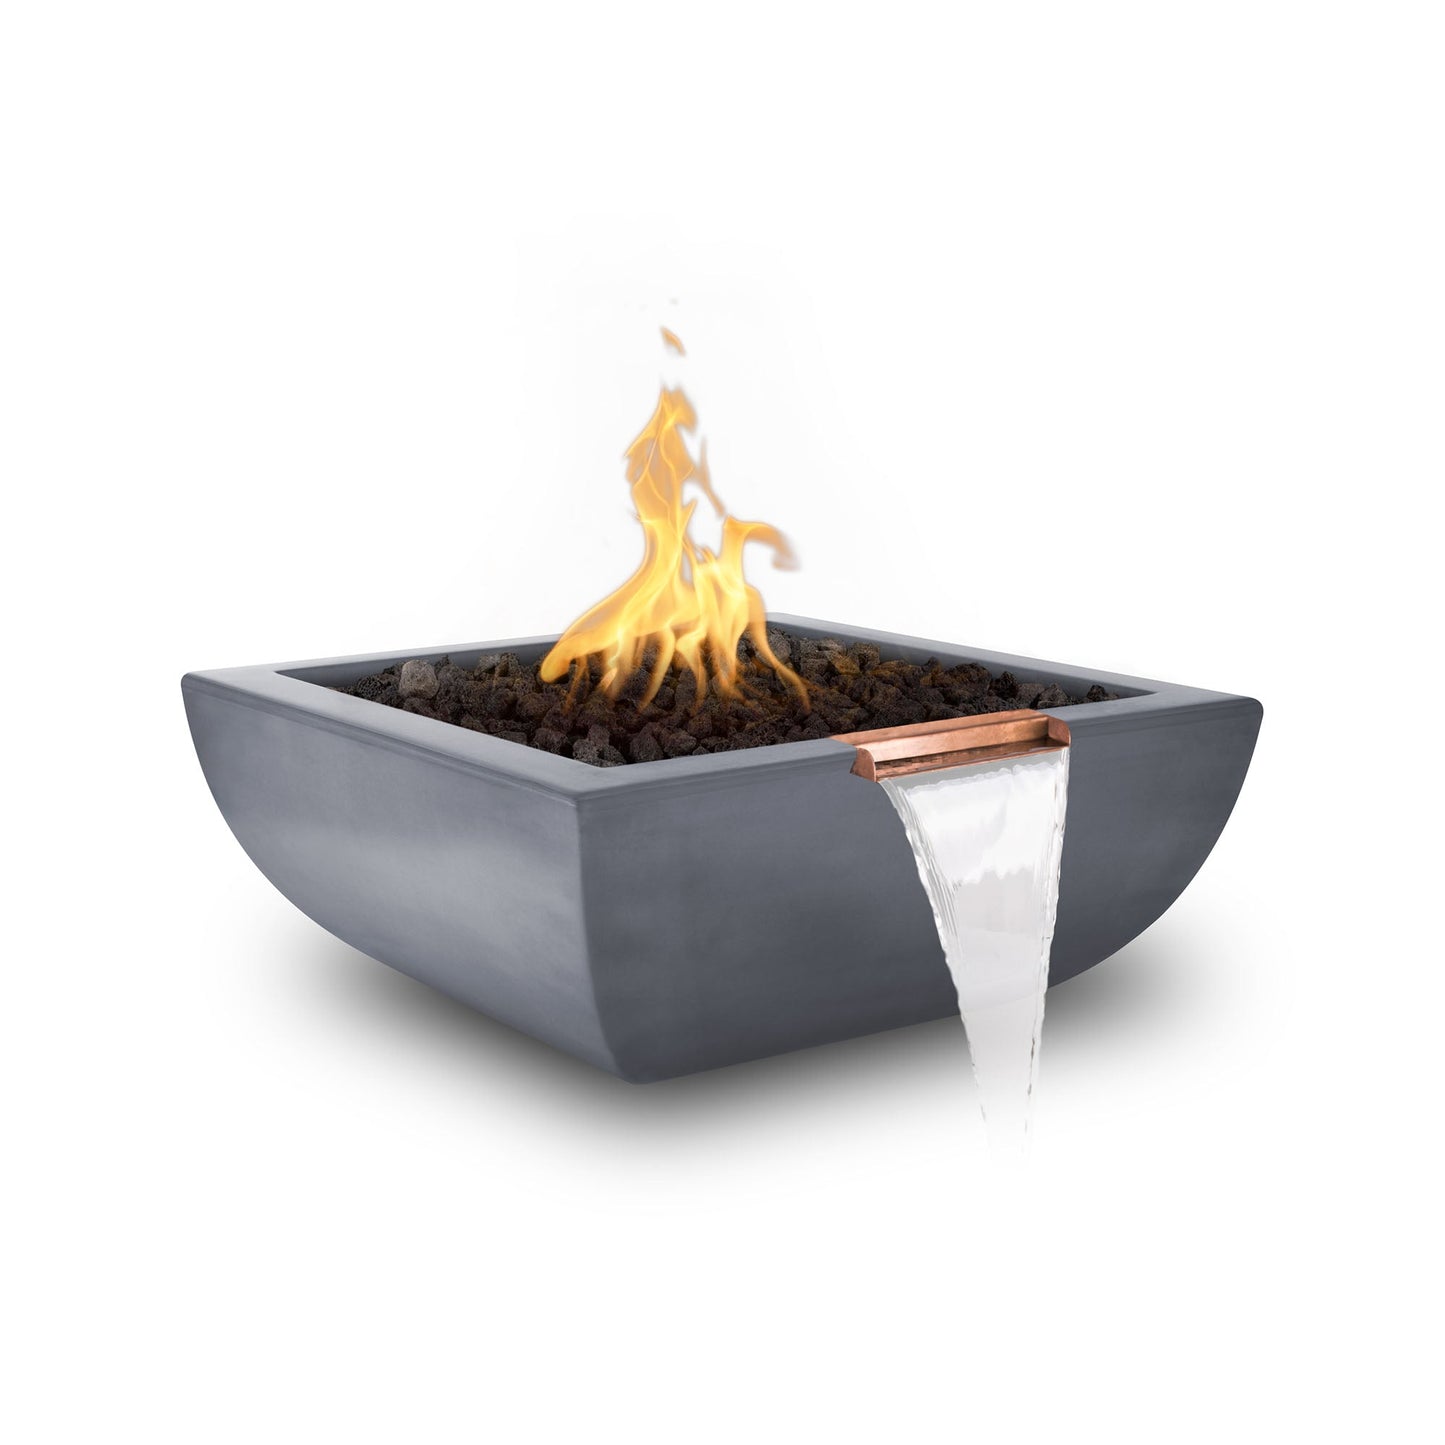 The Outdoor Plus Square Avalon 24" Metallic Copper GFRC Concrete Liquid Propane Fire & Water Bowl with Match Lit with Flame Sense Ignition